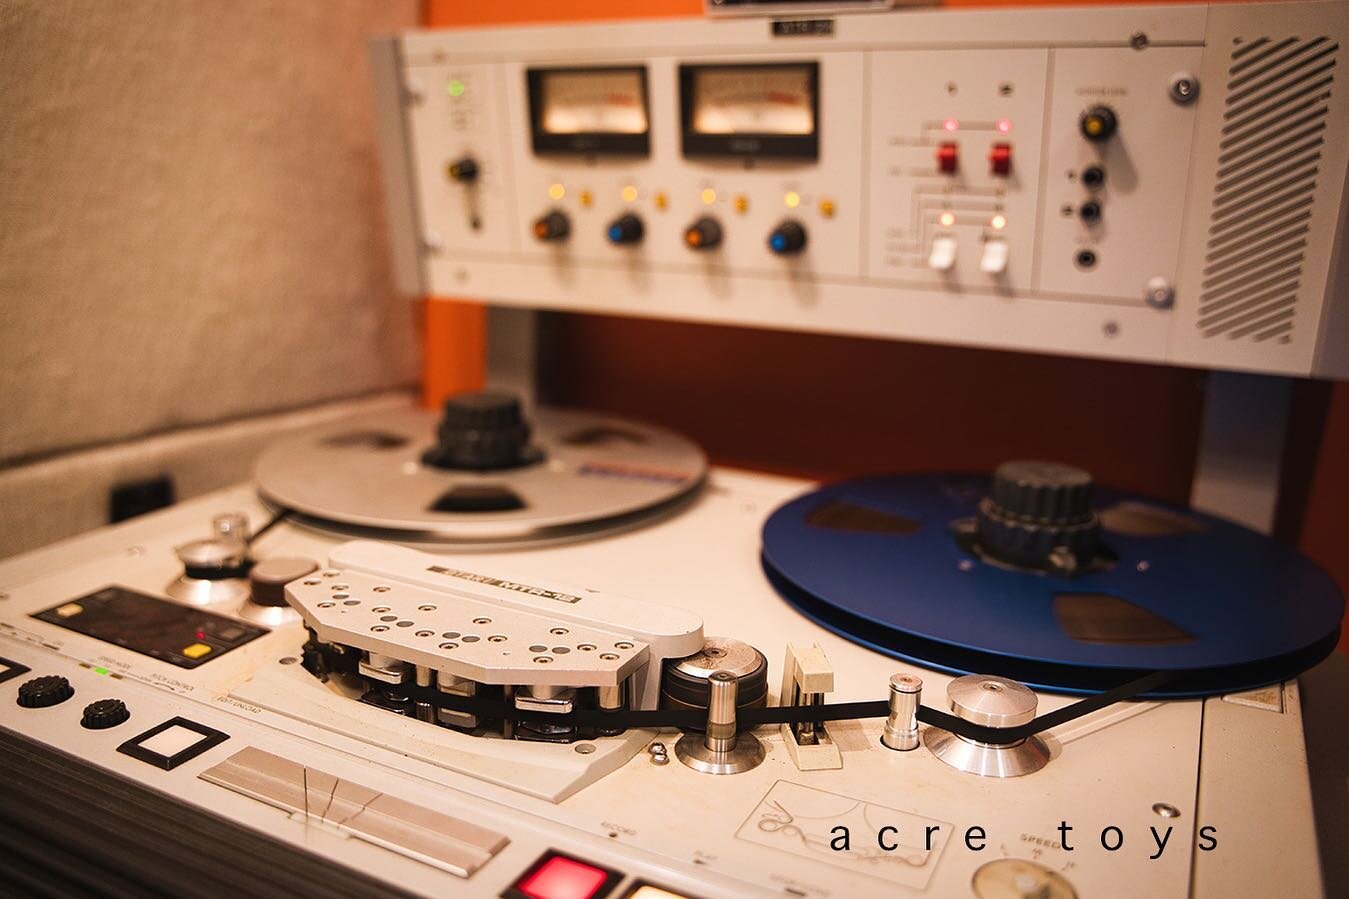 Acre toys #17 OTARI MTR-12 1/4&rdquo; 2 Track Tape Machine

These scribblings are independent thoughts with no affiliation to any company and will be intentionally unscientific&hellip;

Before Laptop recording, When Pro Tools was Sound Tools, the you